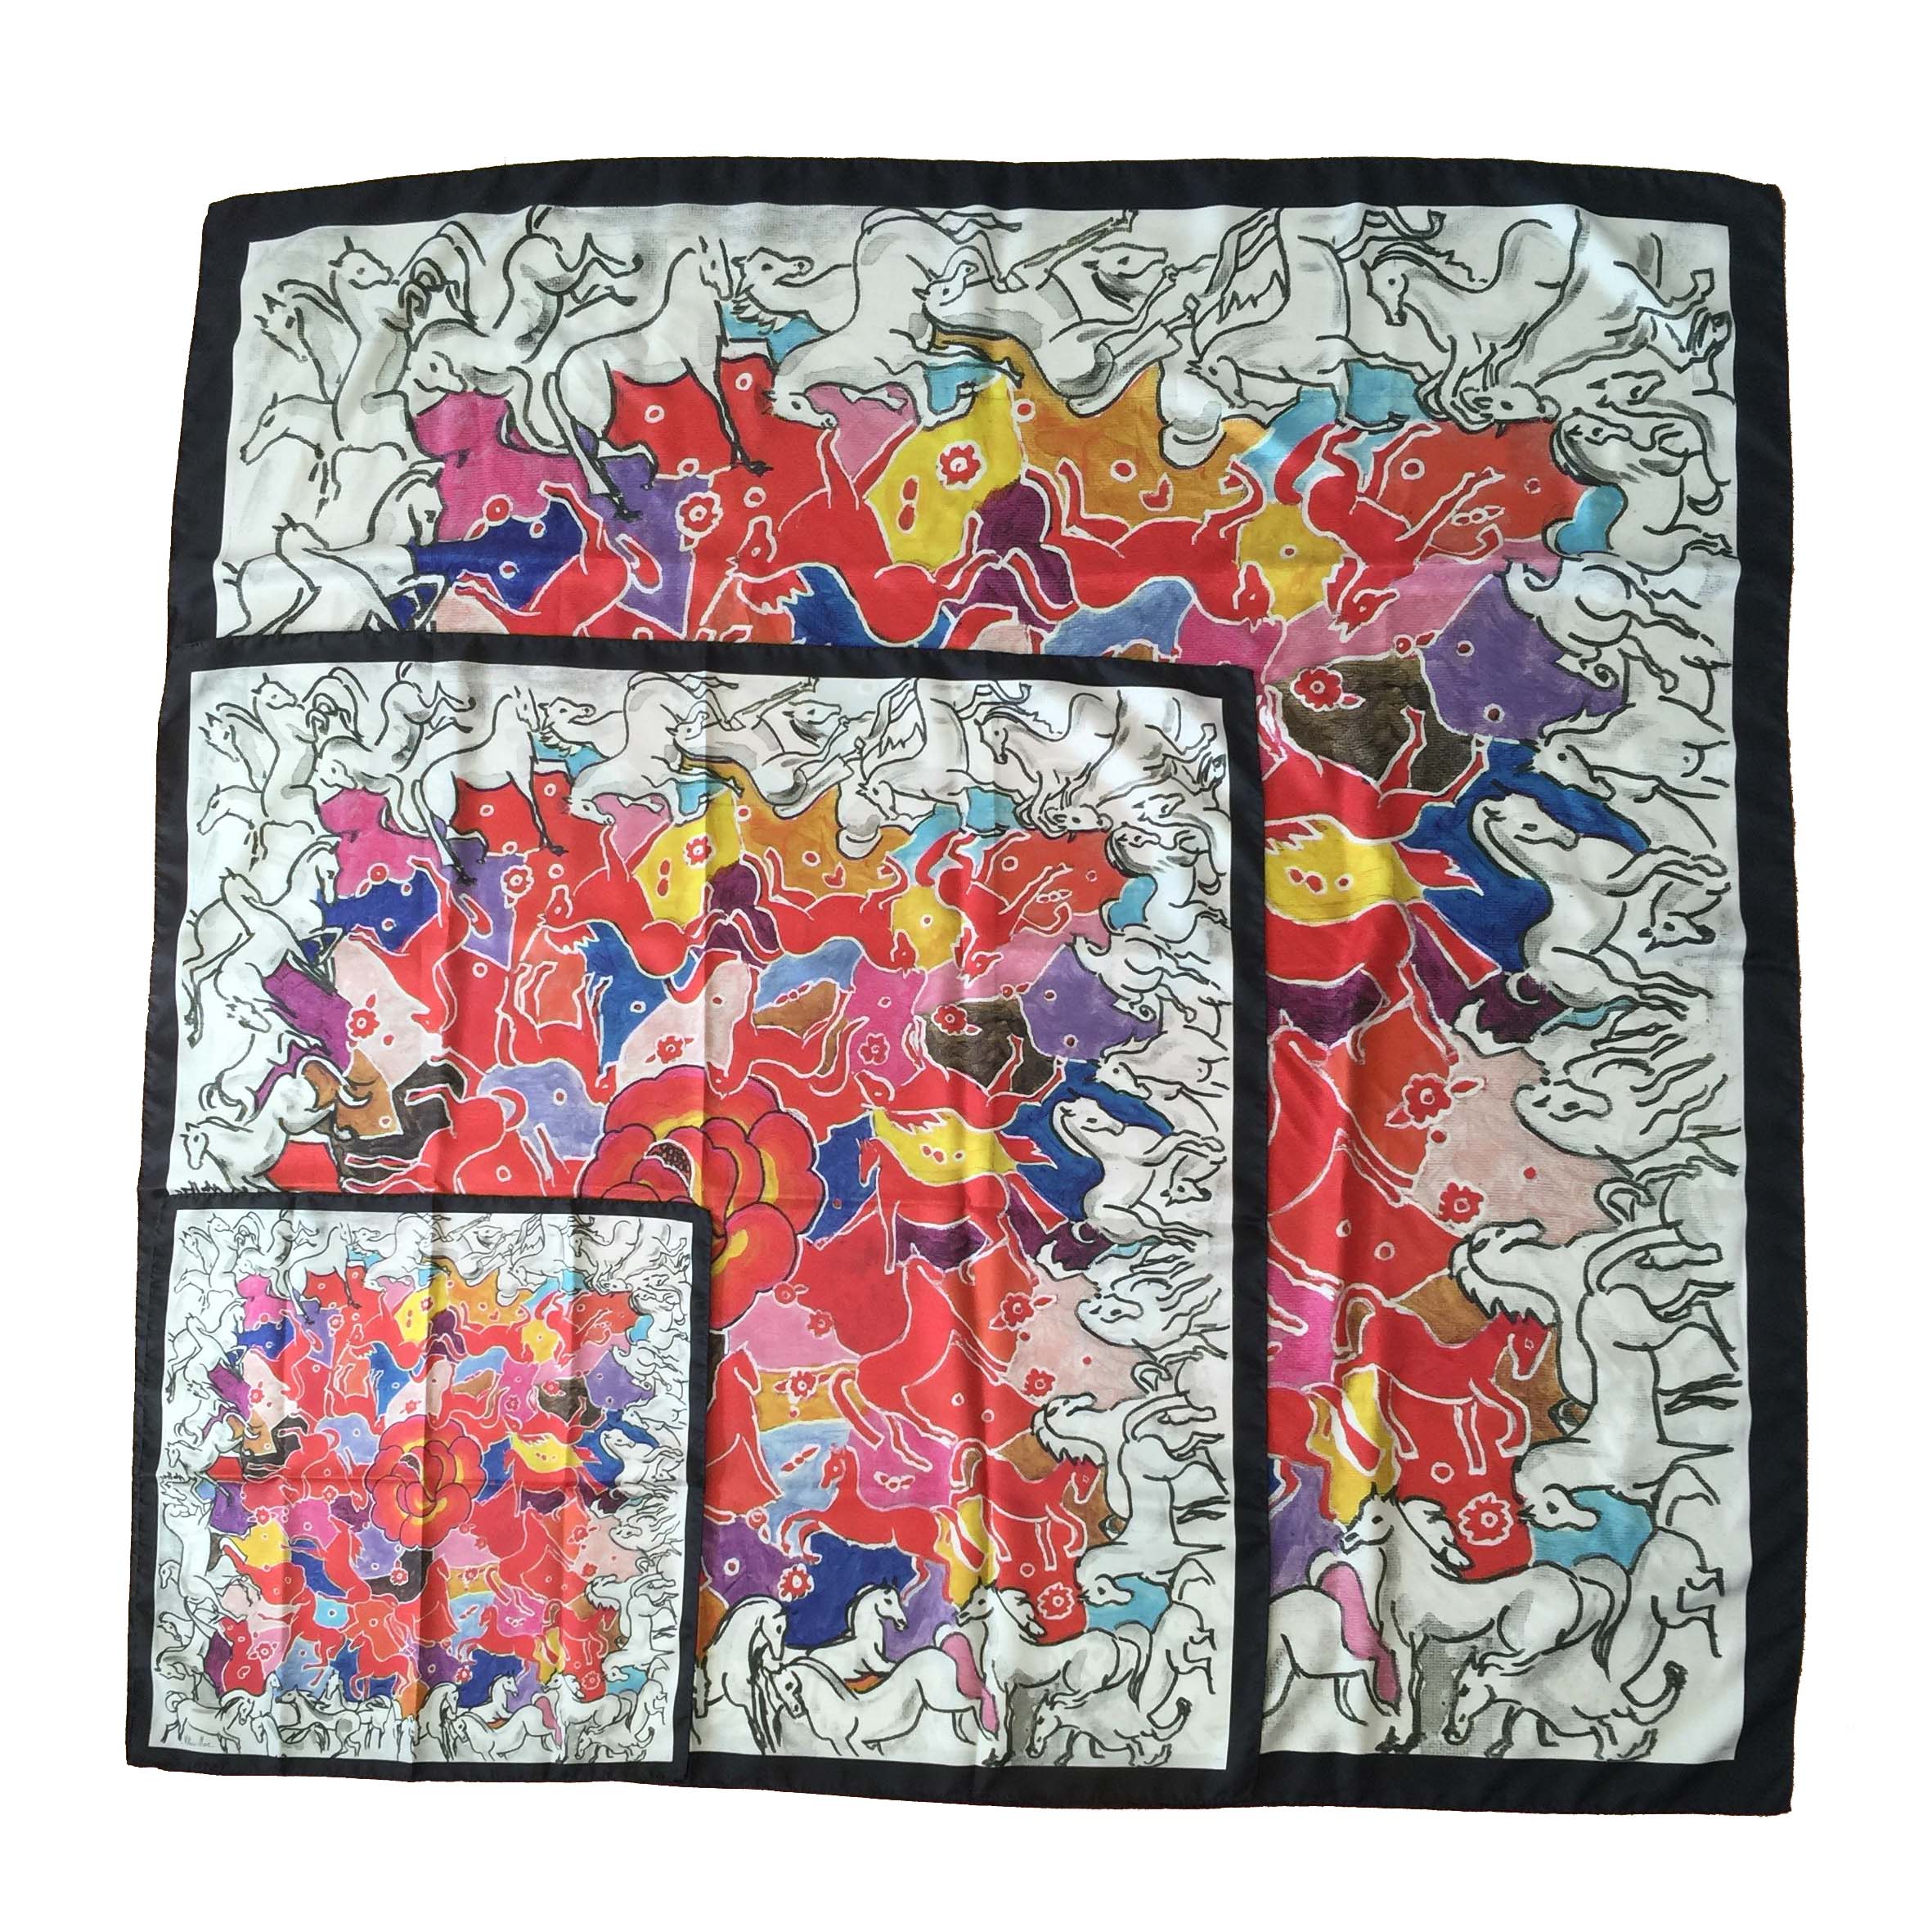 limited edition silk scarf made in France by artist Virginie Pauillac